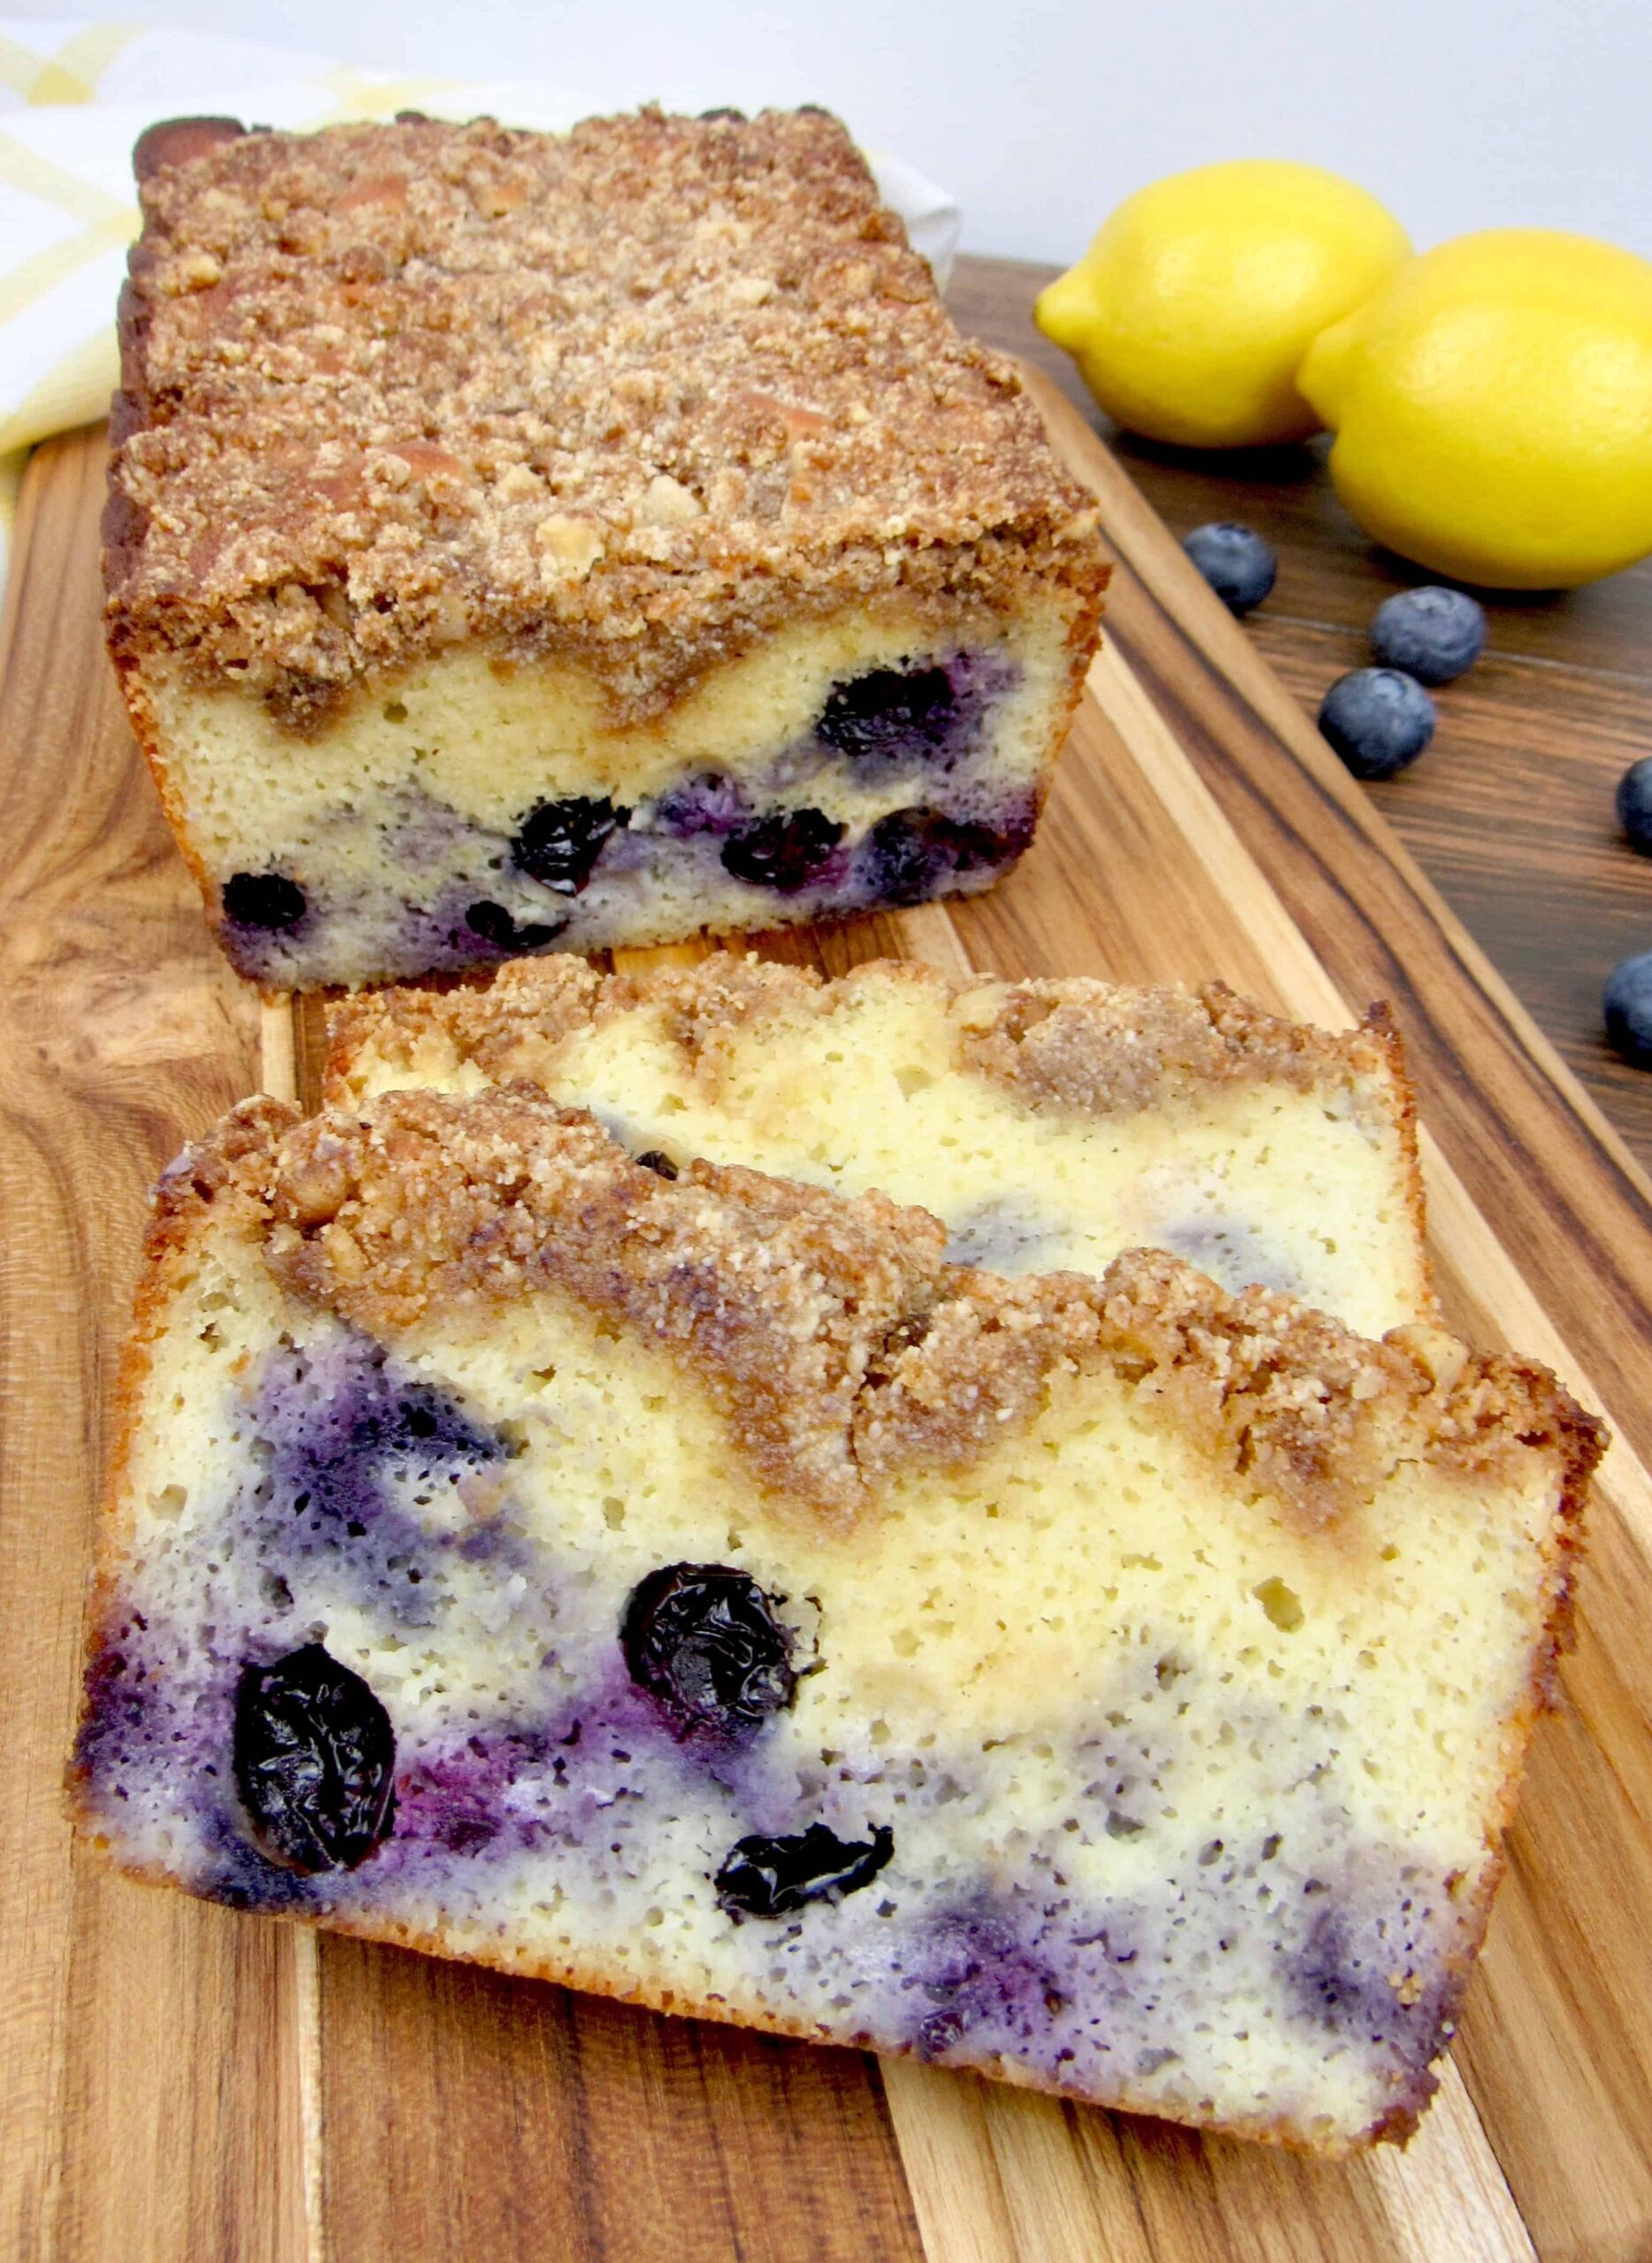  Every bite is packed with juicy blueberries and the perfect amount of sweetness.